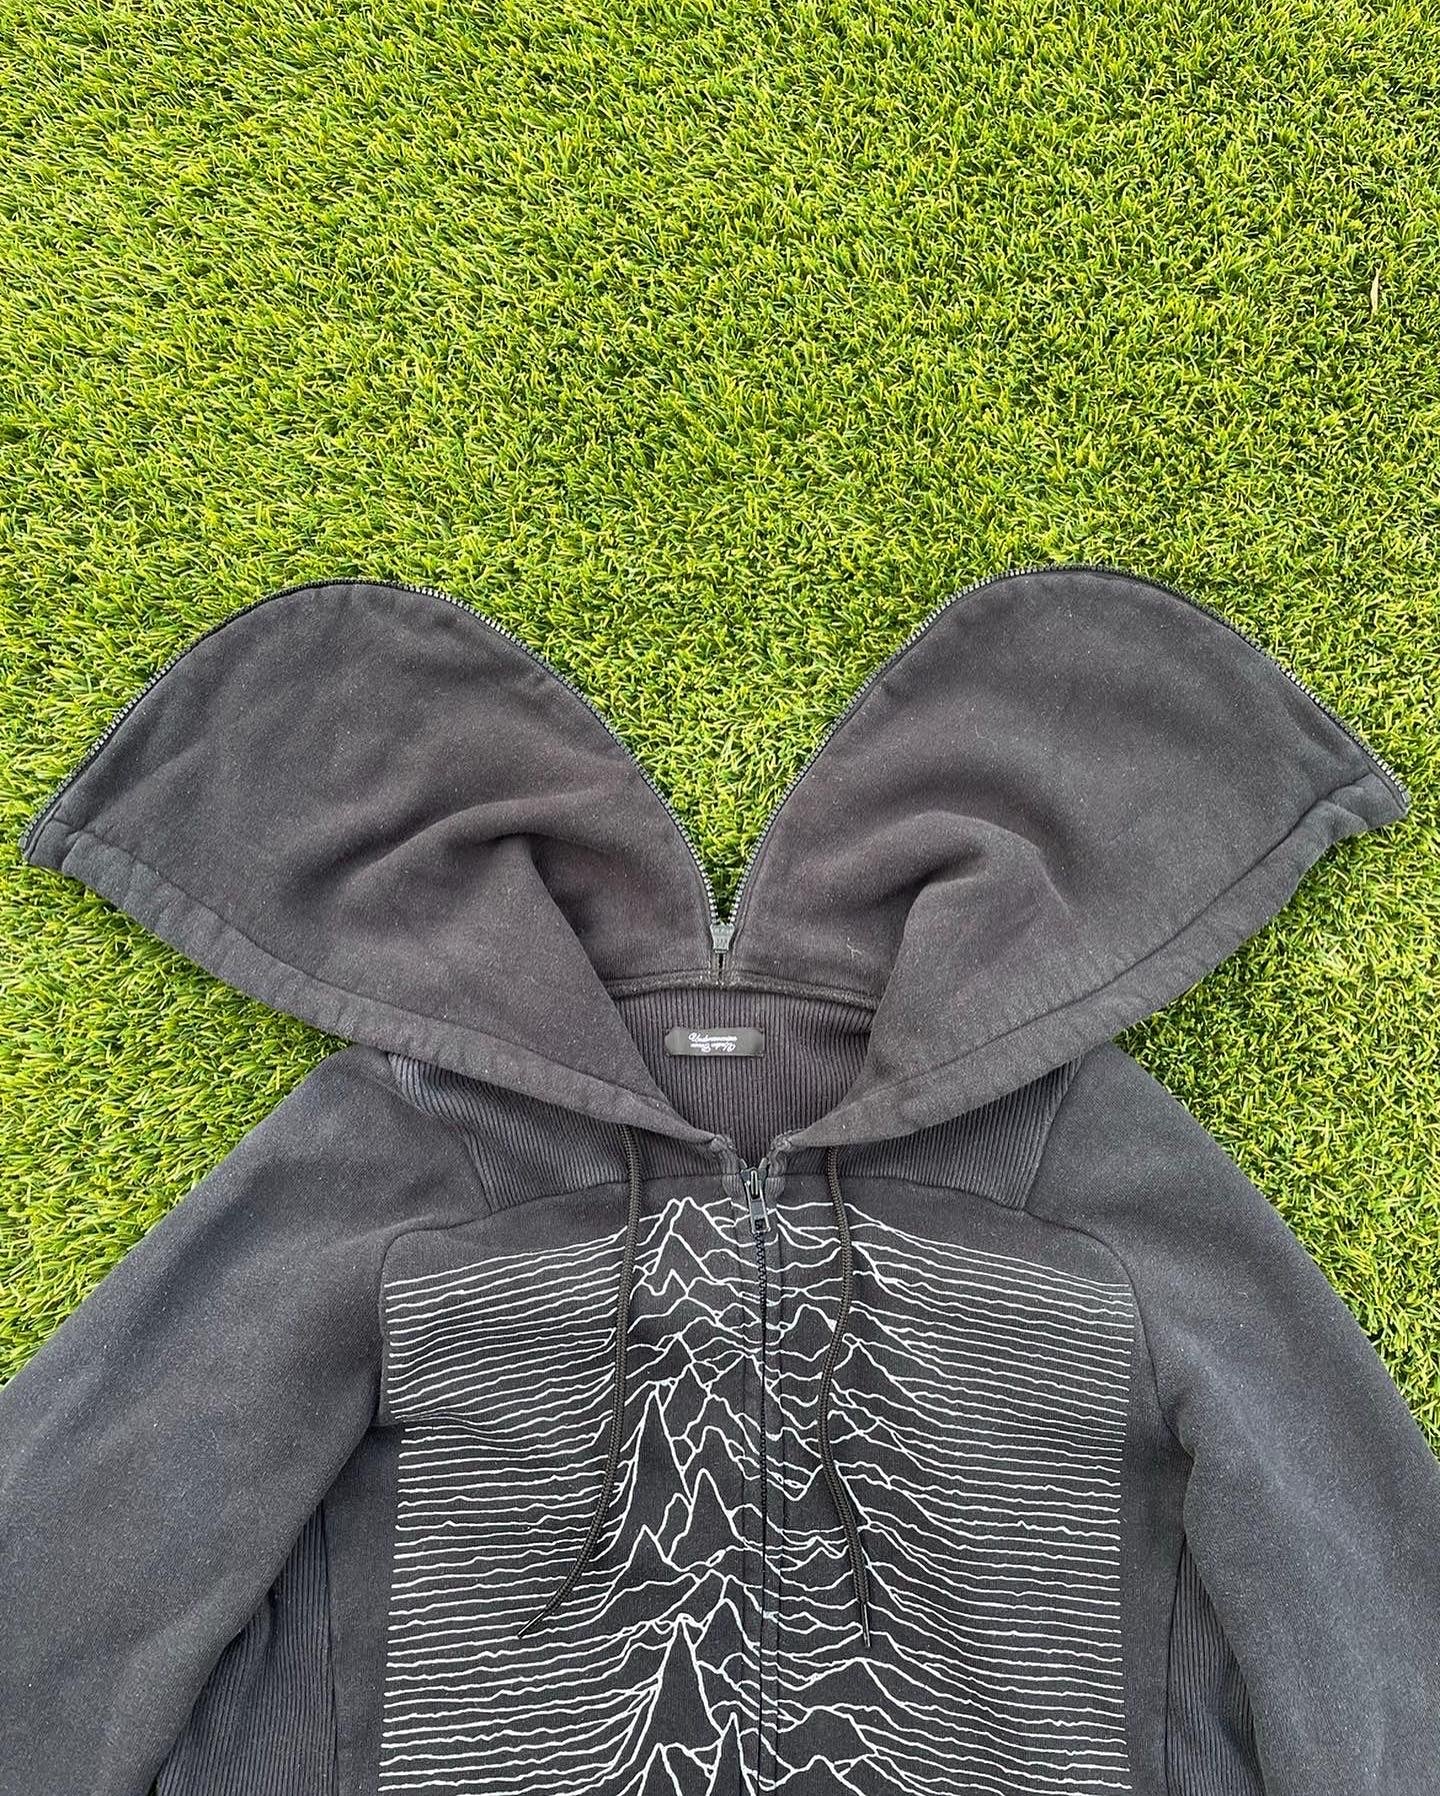 AW09 Undercover Joy Division Unknown Pleasures Zip Up Hoodie 